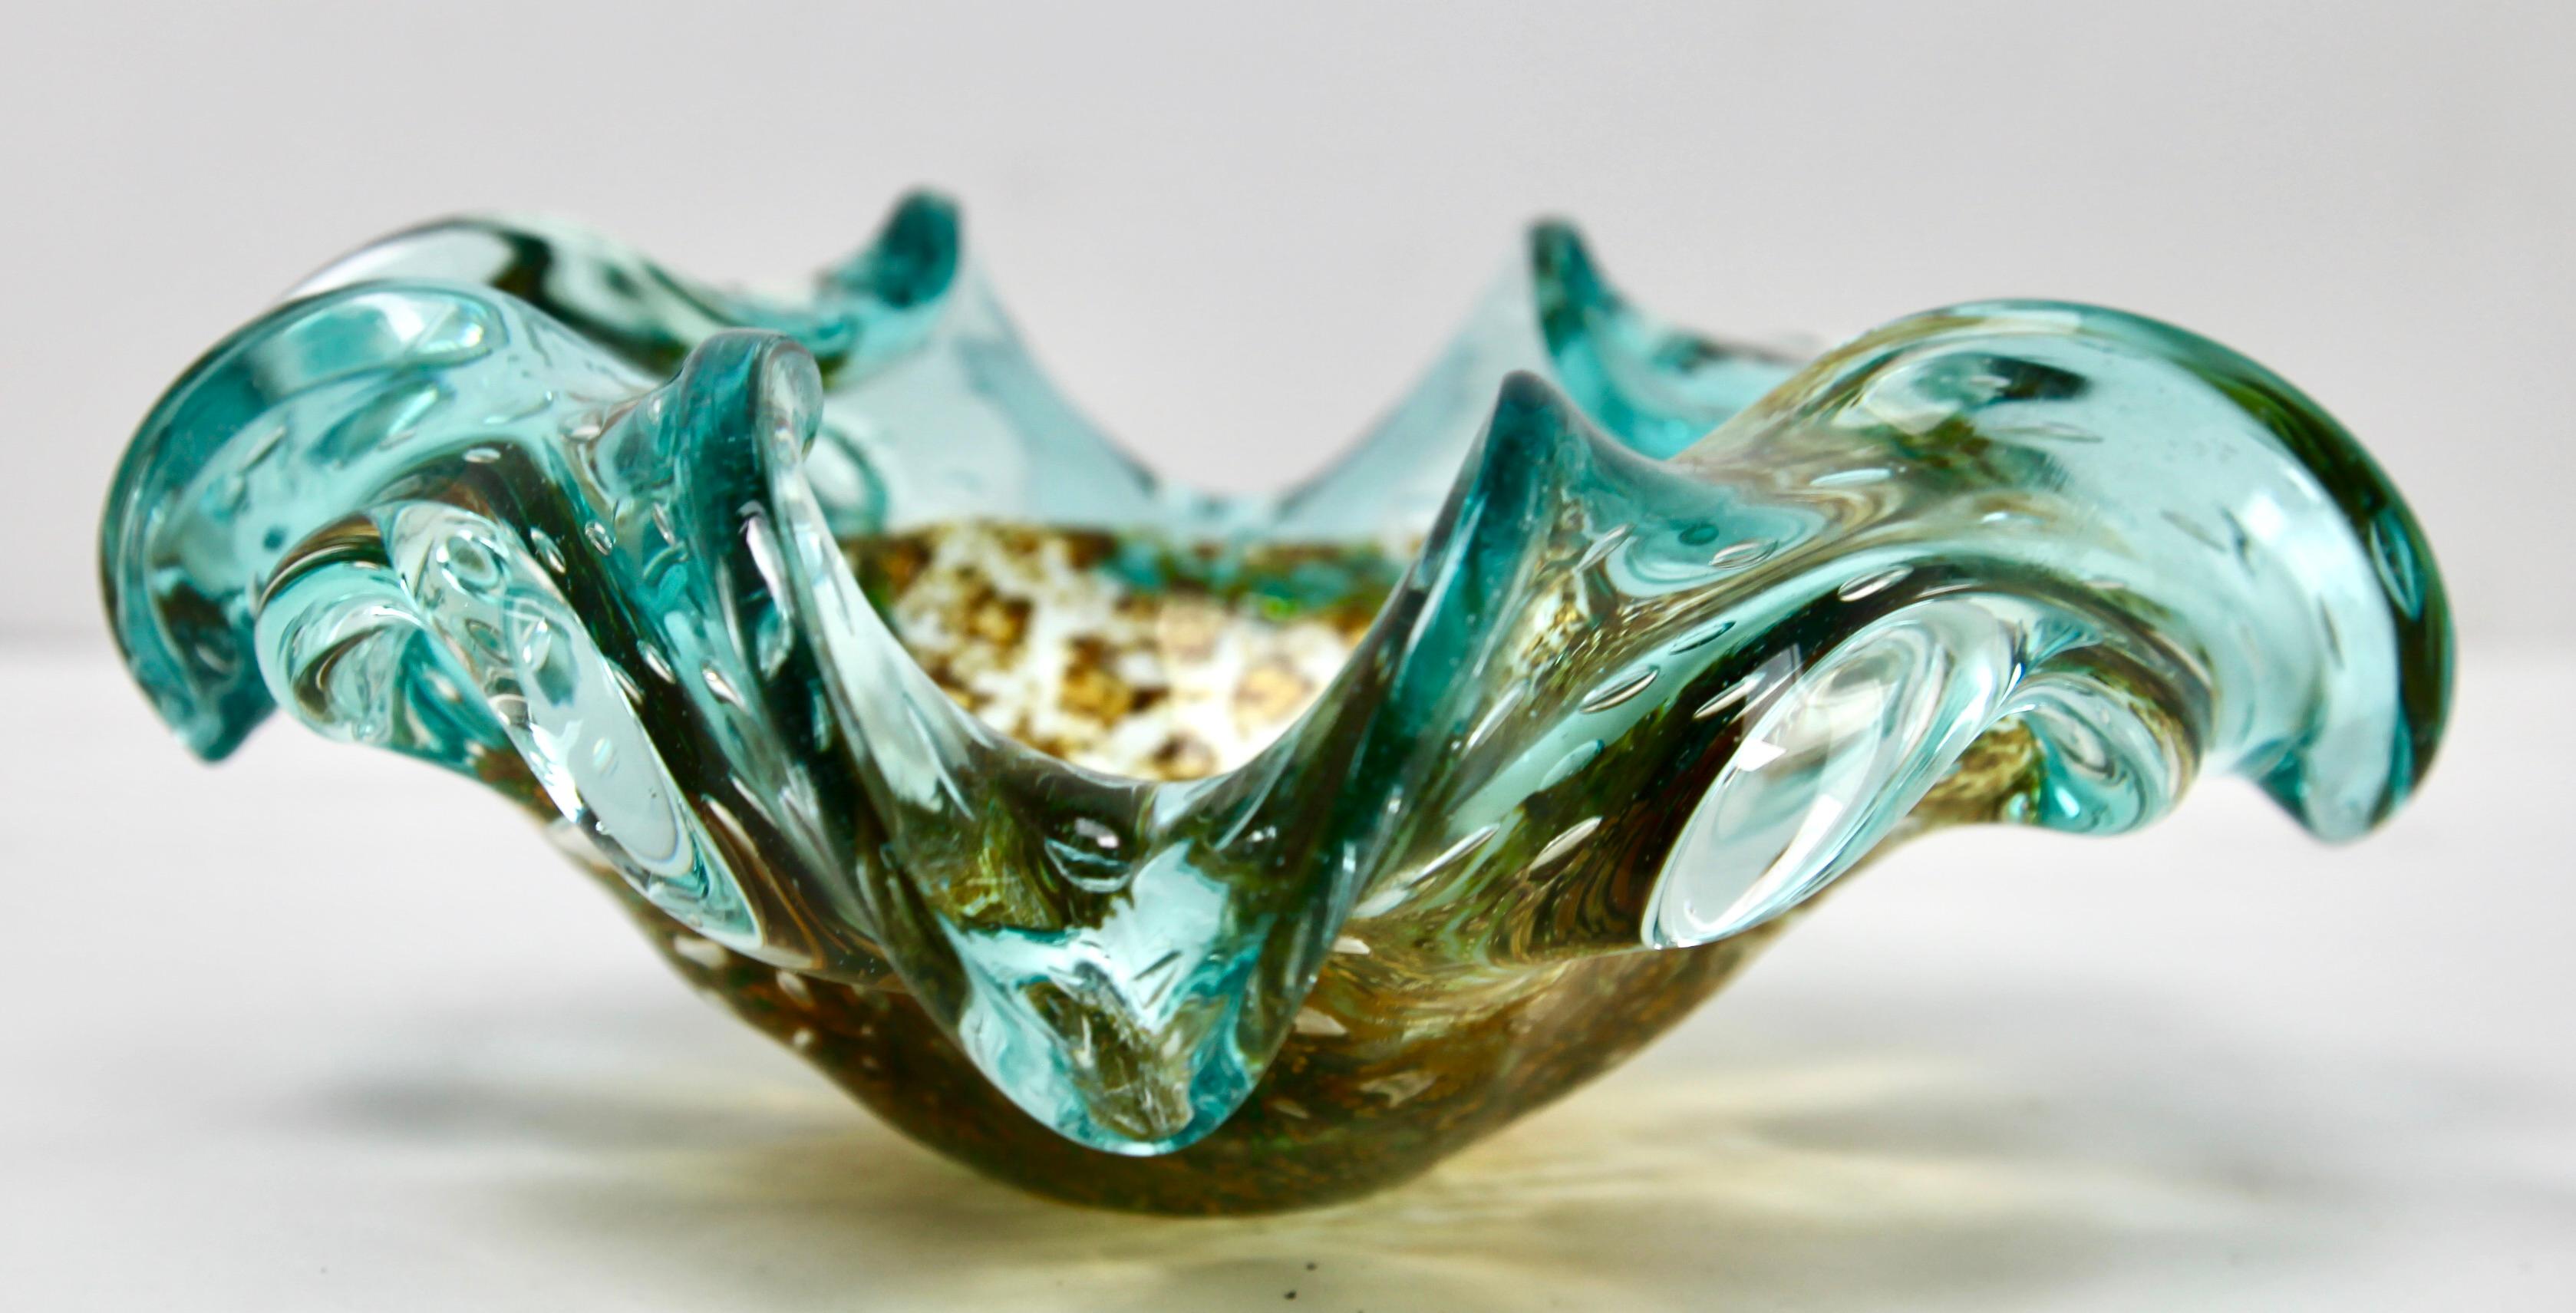 Mid-20th Century Murano Glass Chartreuse and Gold Fleck Ruffle Biomorphic Bowls of 1950s